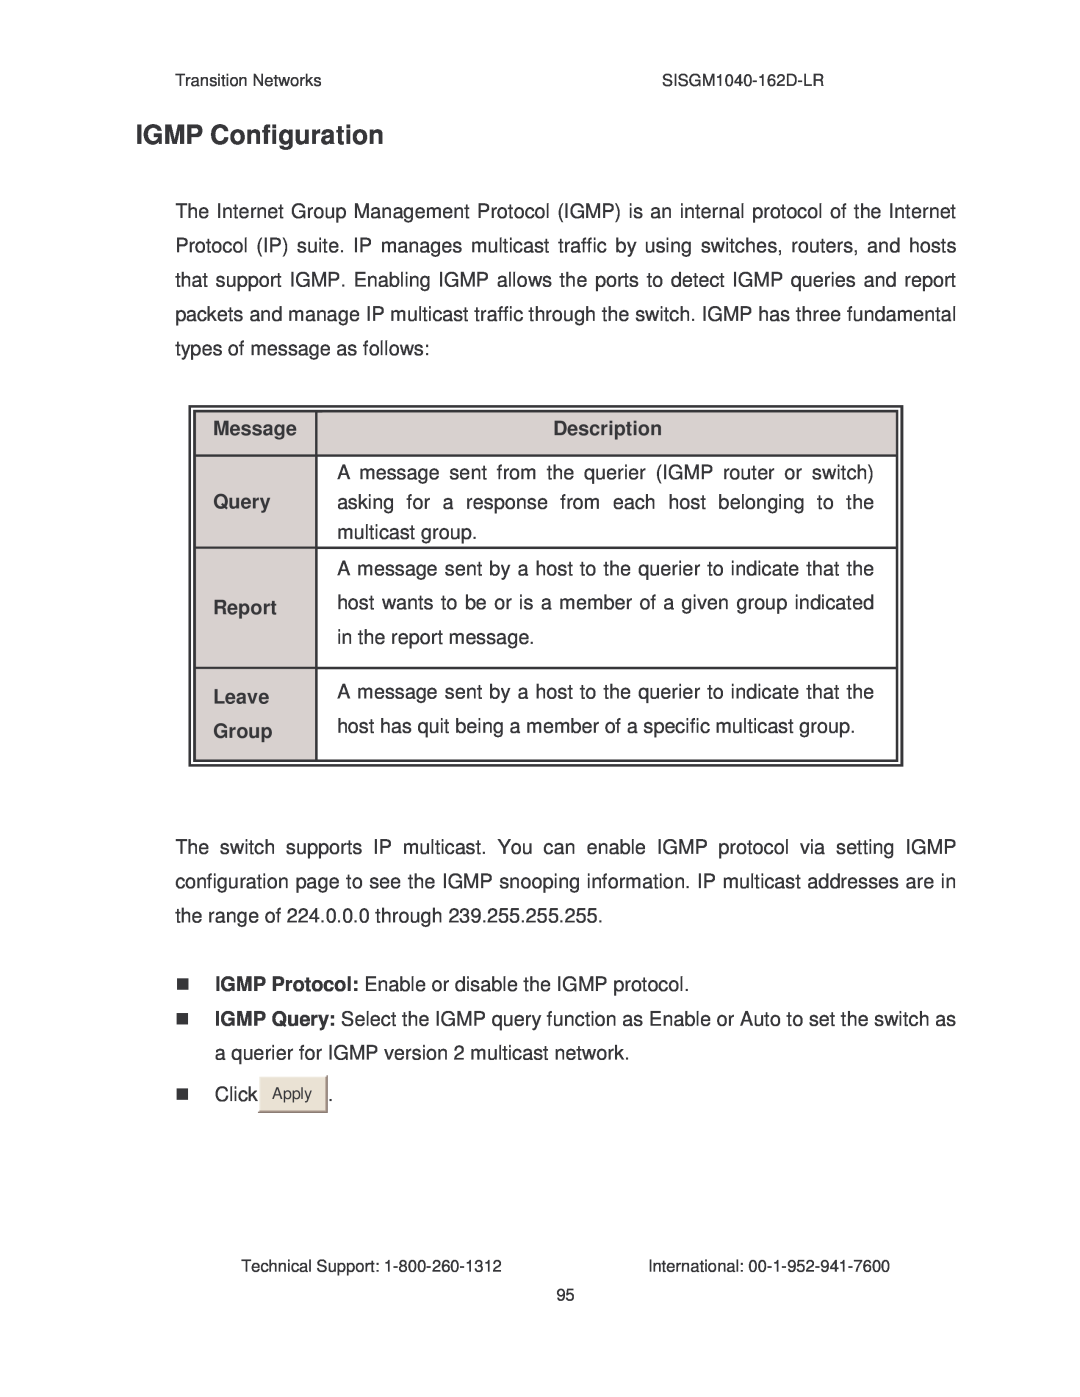 Transition Networks SISGM1040-162D manual IGMP Configuration 